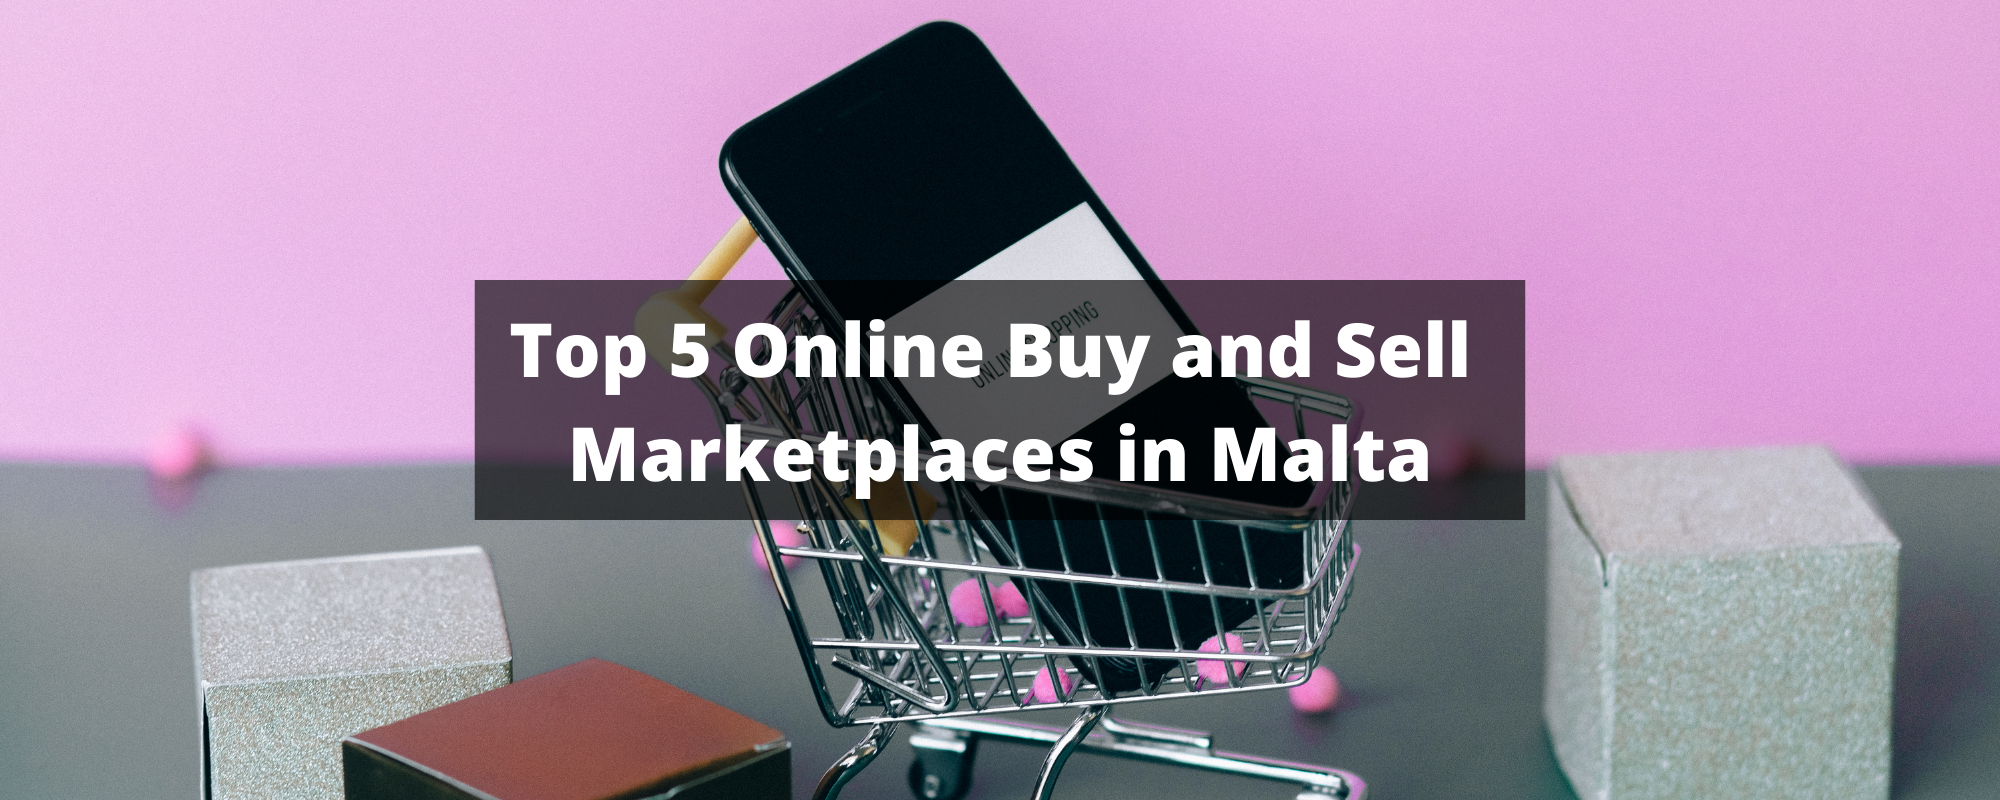 online buy and sell marketplaces in malta